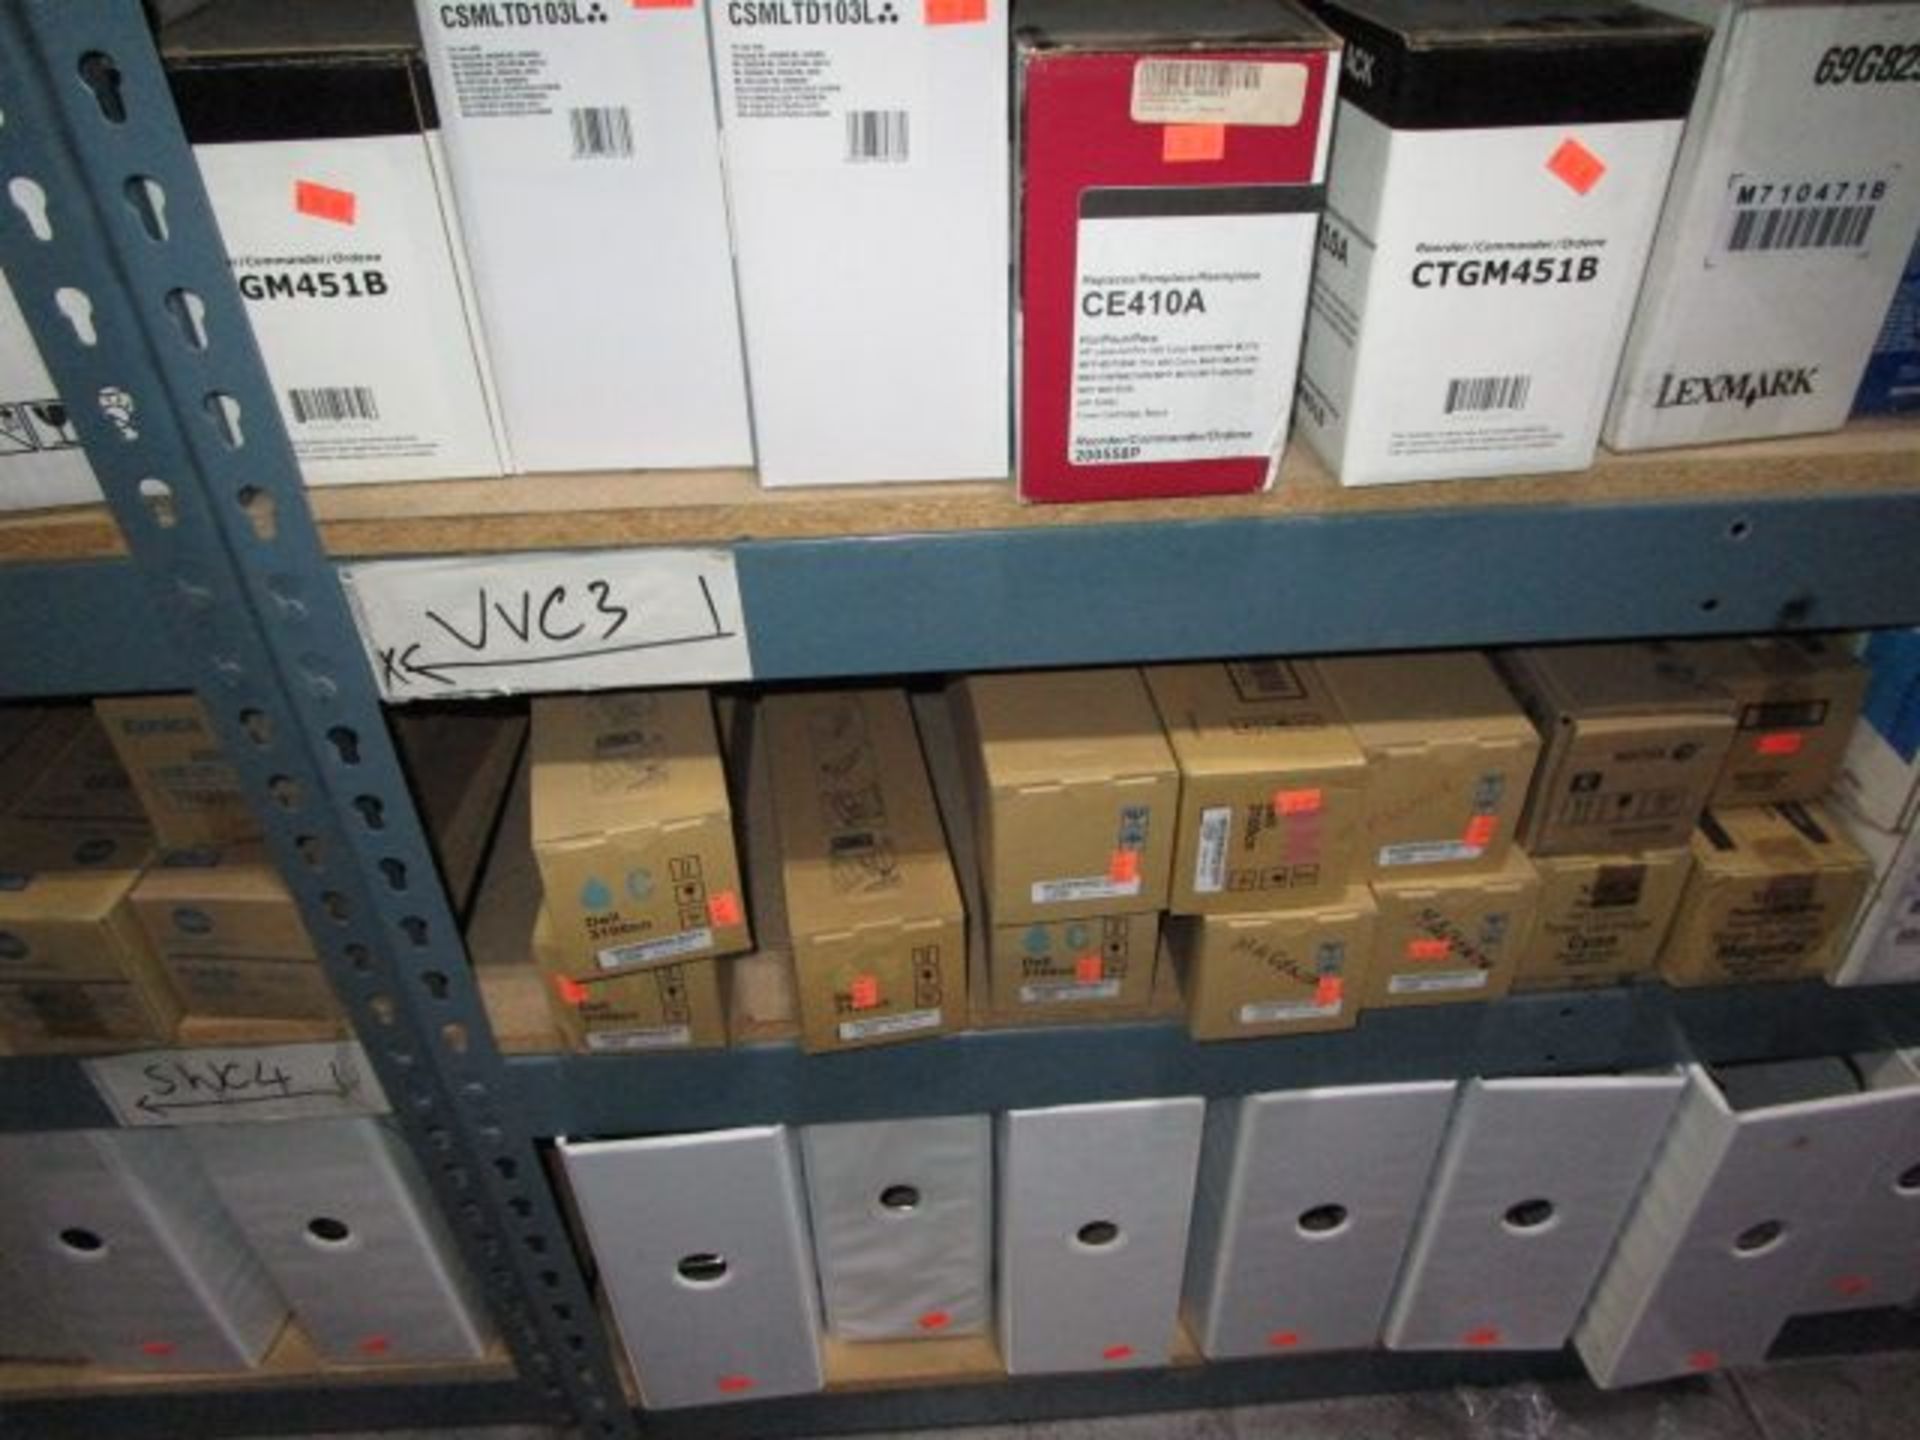 SHELVING UNIT OF ASSORTMENT OF INK/TONER AND BINDERS - Image 7 of 11